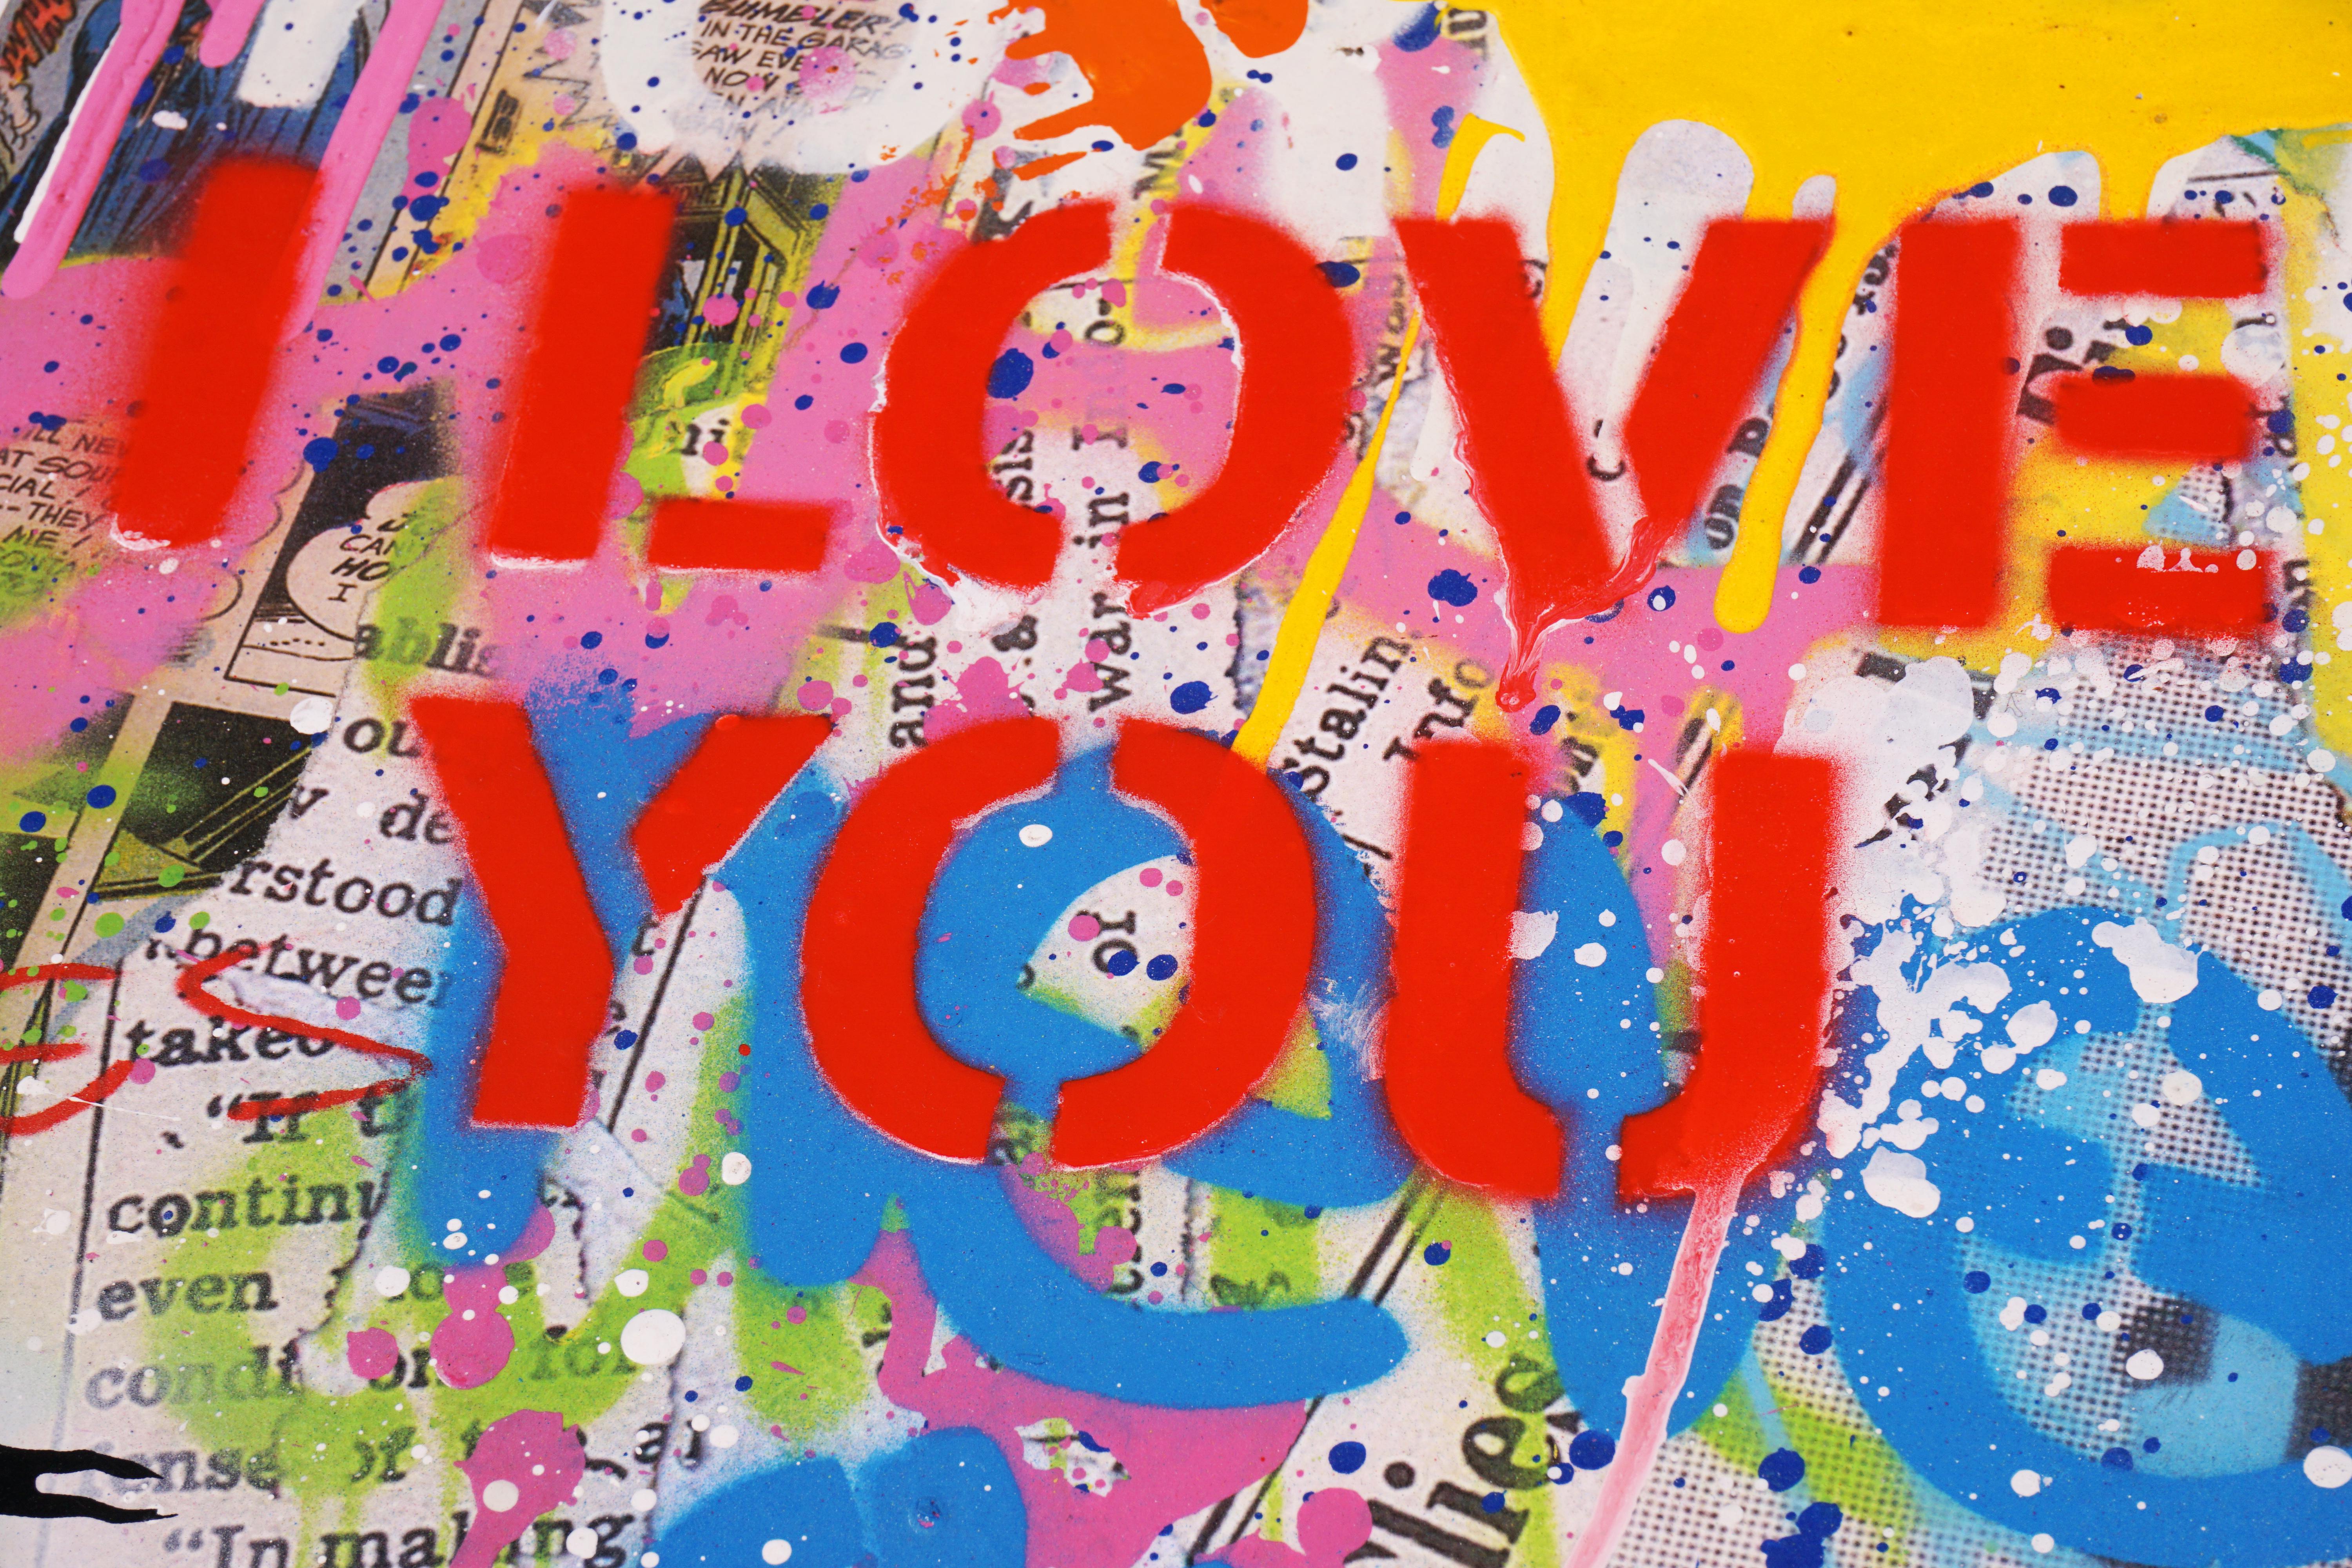 Mr. Brainwash, 'I Love You' Small Balloon Girl, Unique Painting, 2021 2